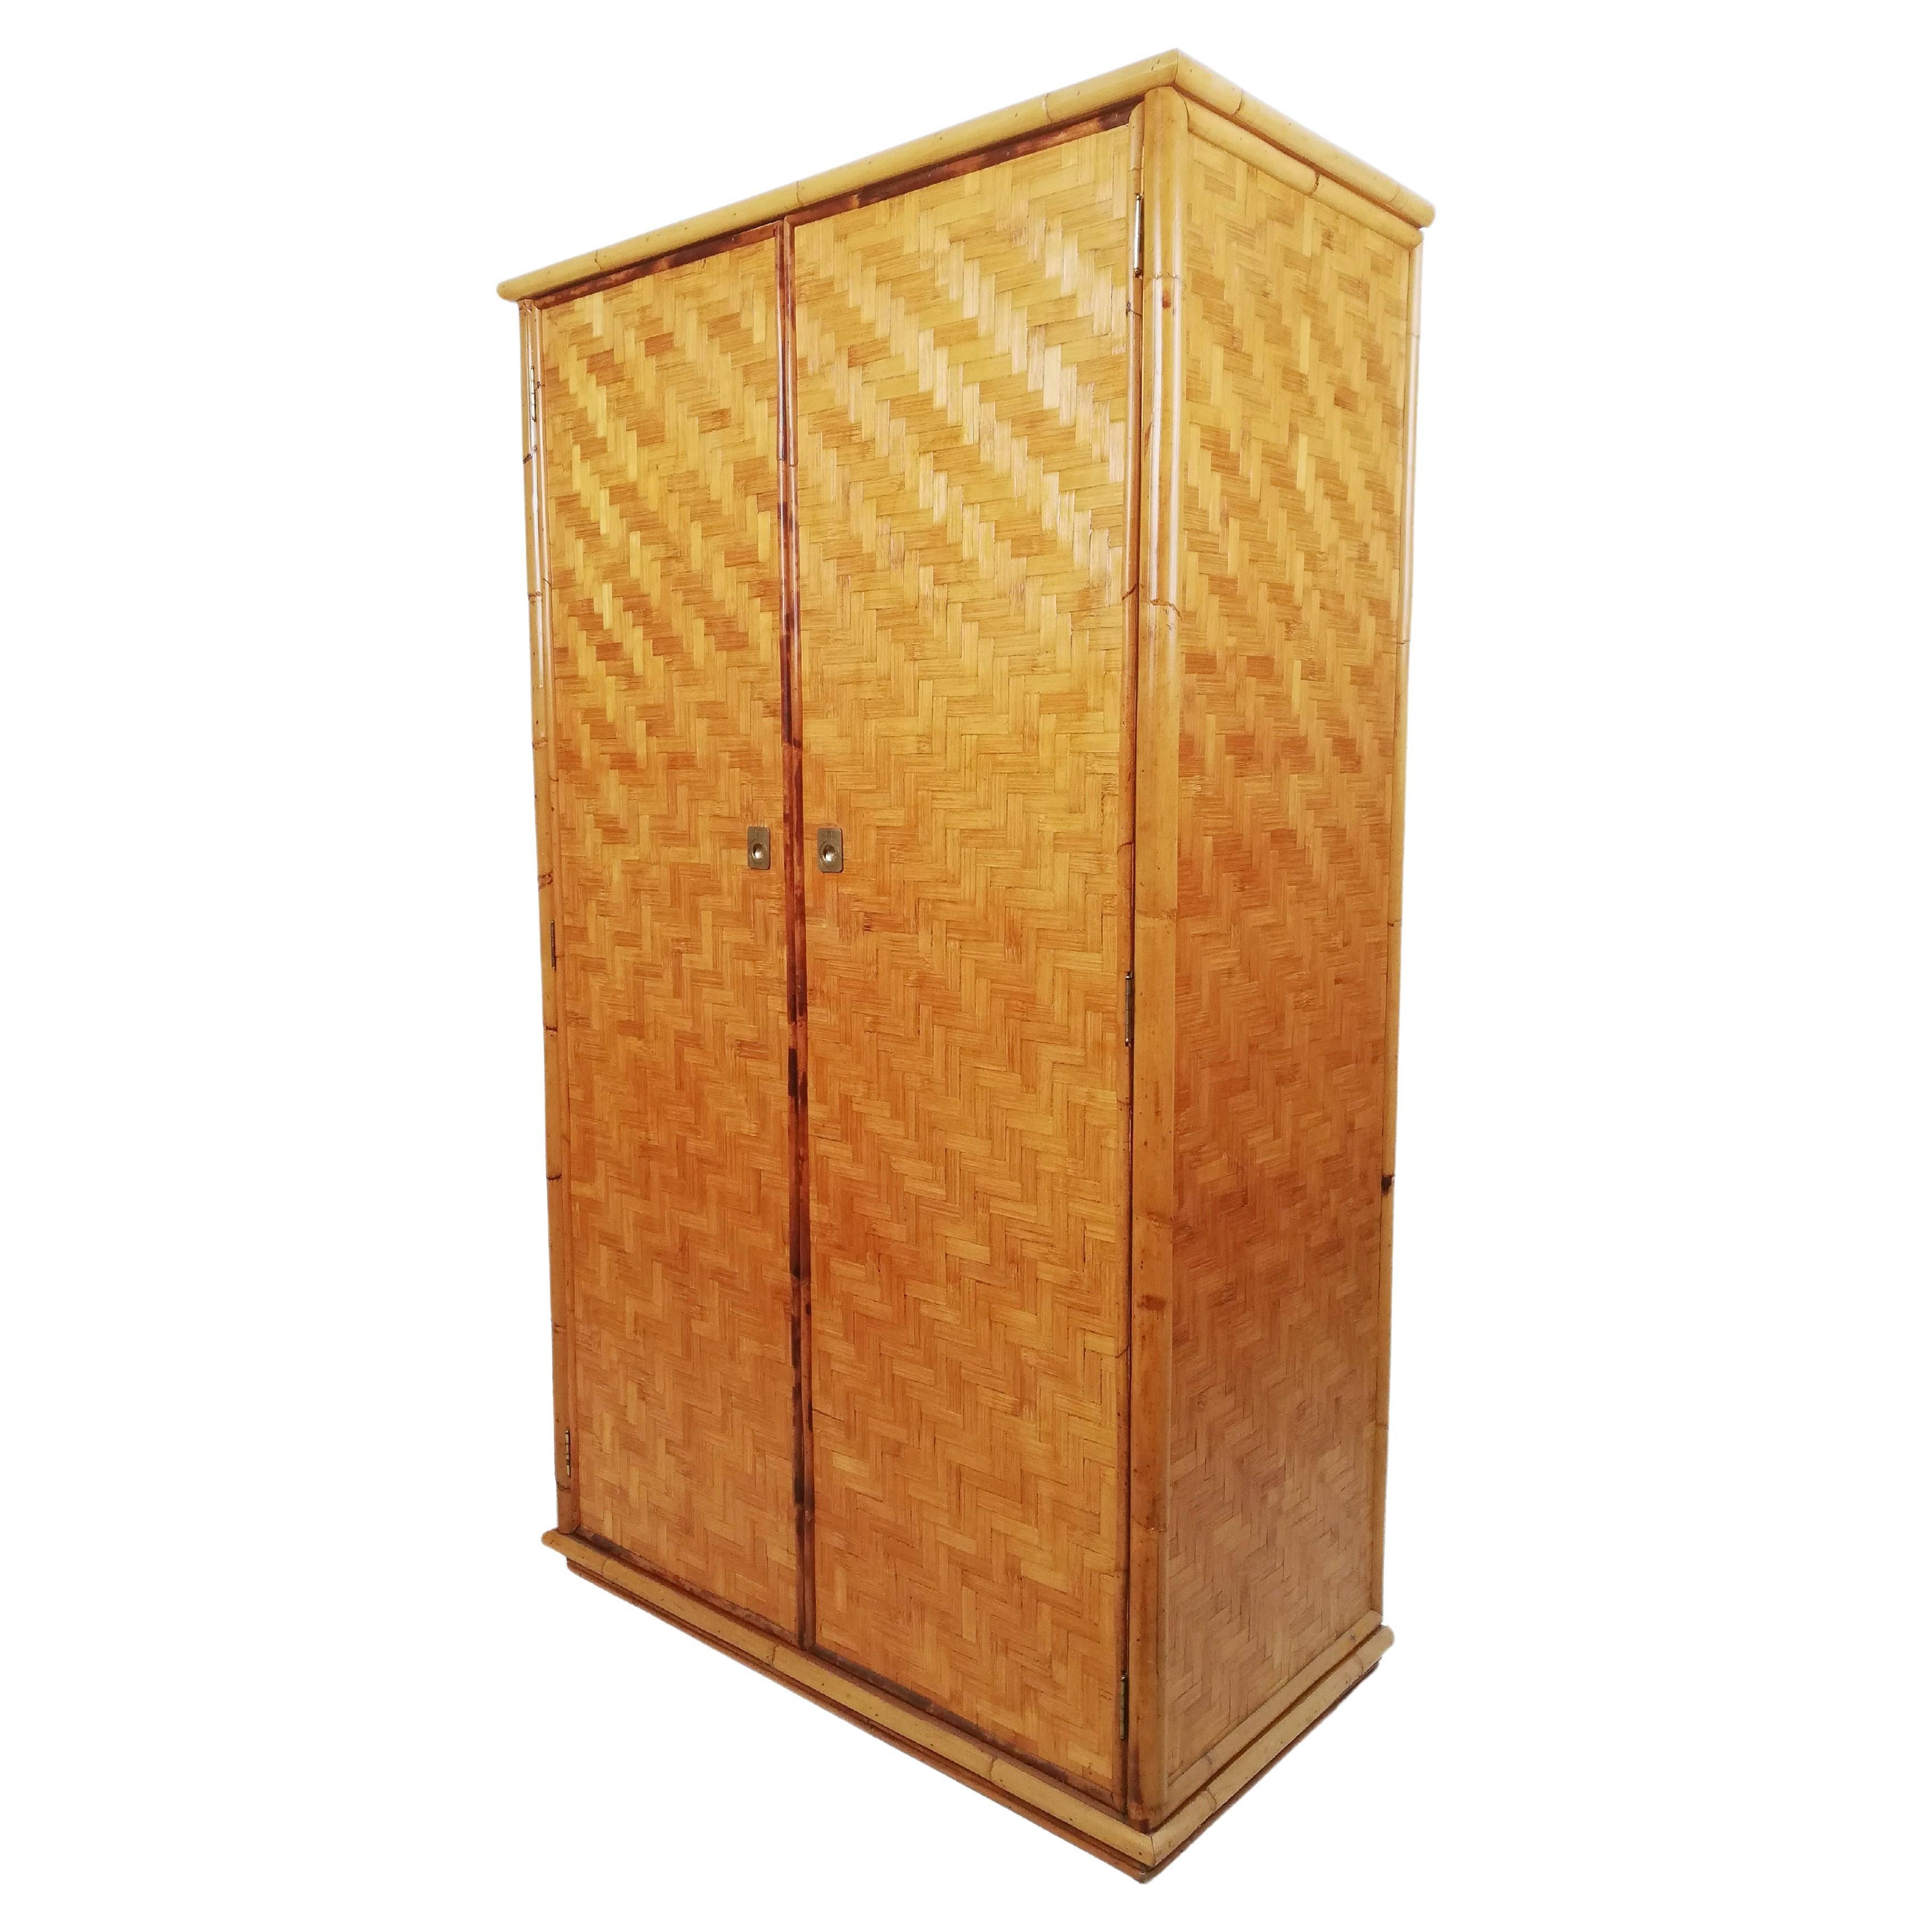 Vintage 2 Door Wardrobe in Wicker Cane, Rattan and Bamboo by Dal Vera, 1970s For Sale